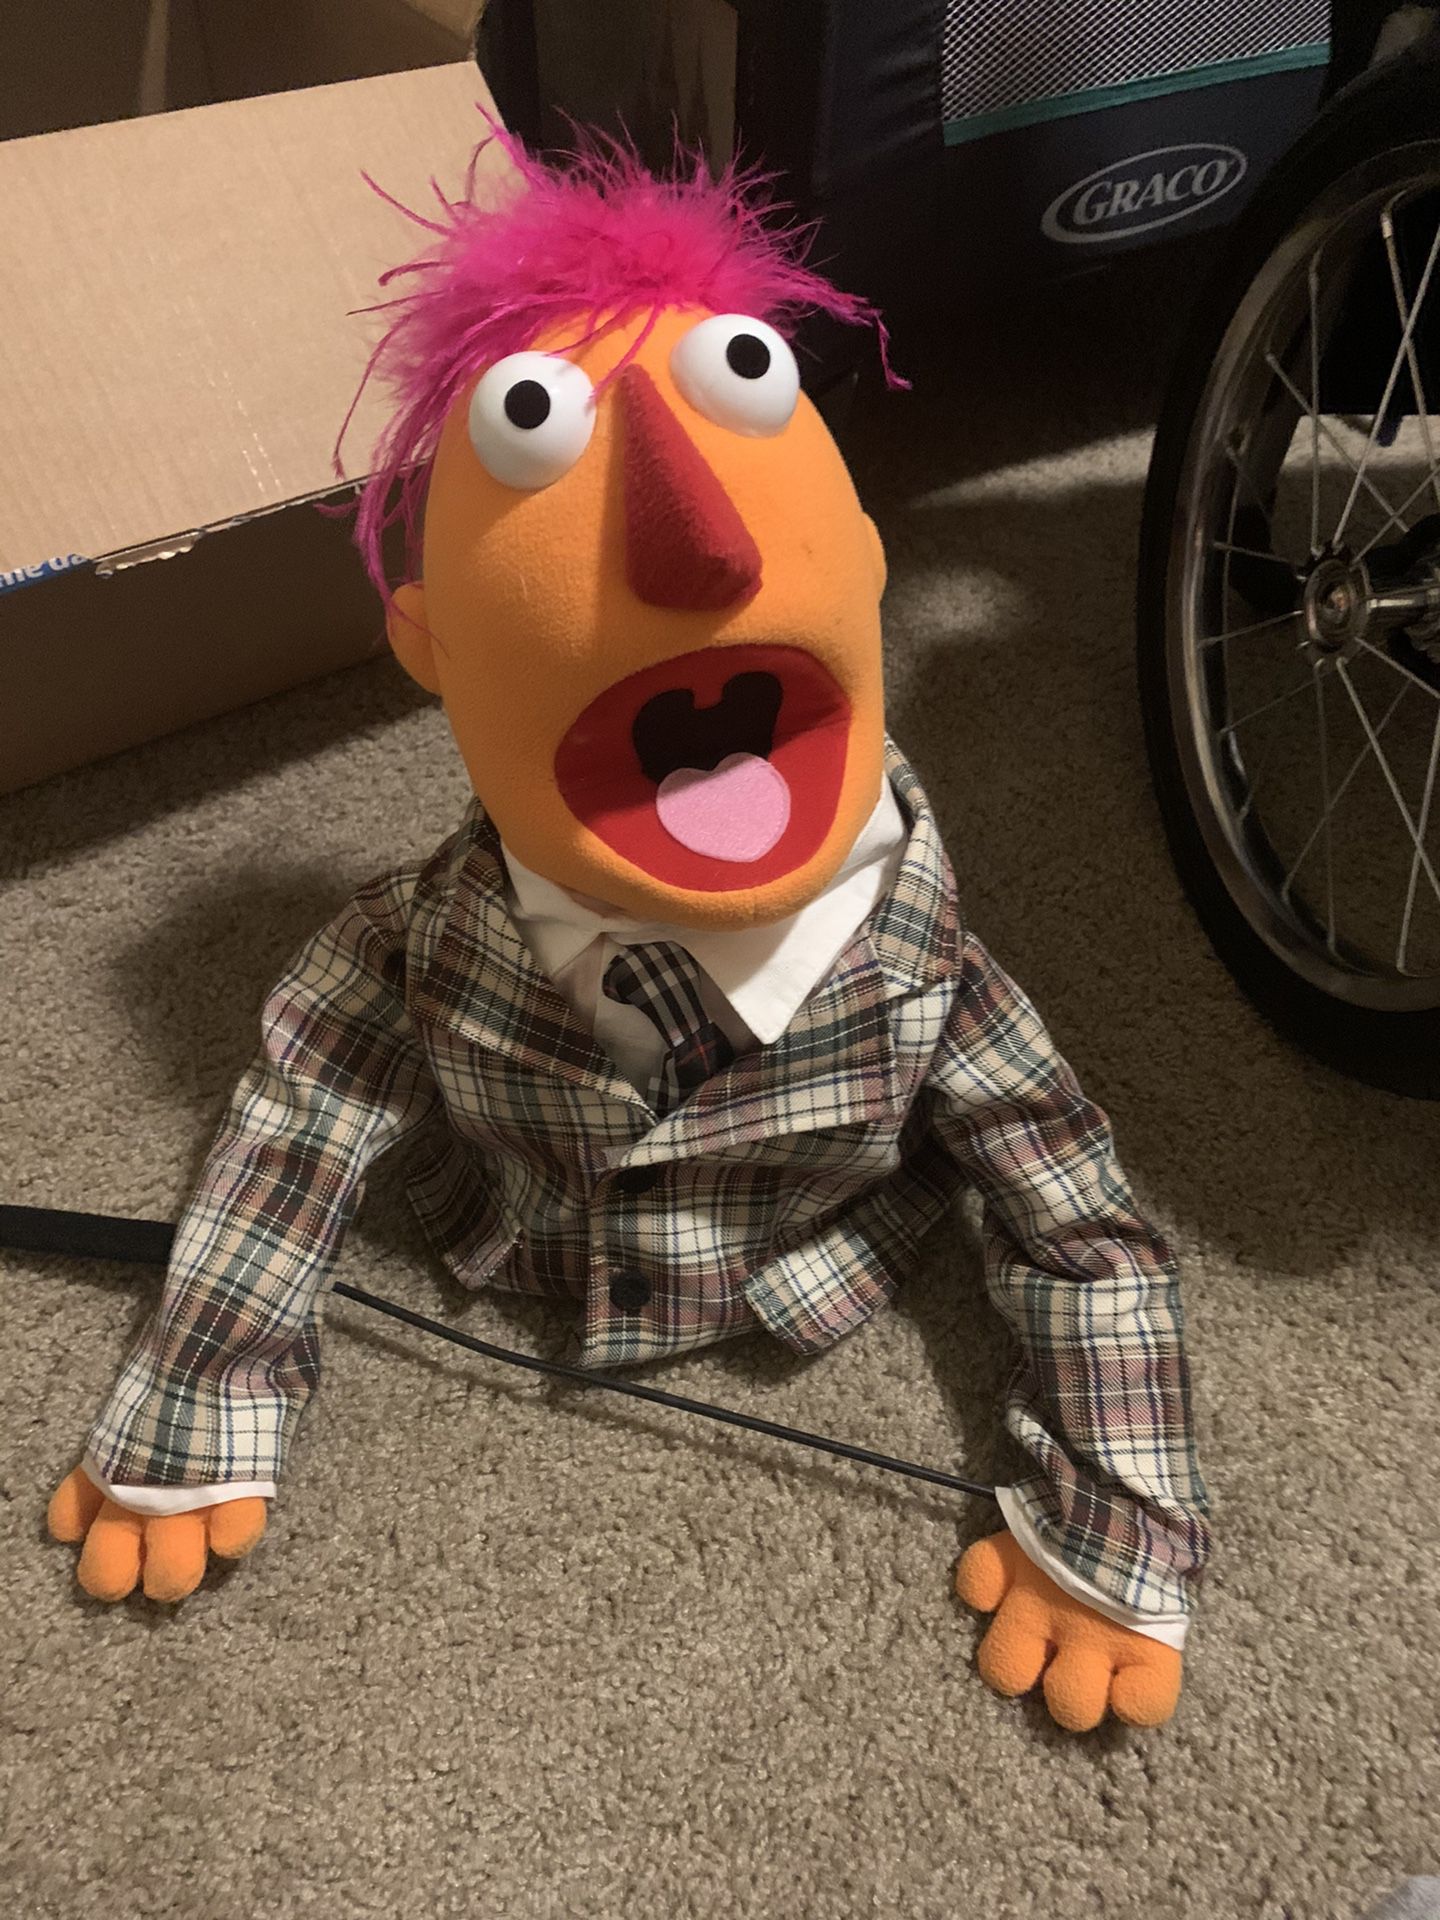 “Muppet” puppet! Great for kids, and Christmas gift